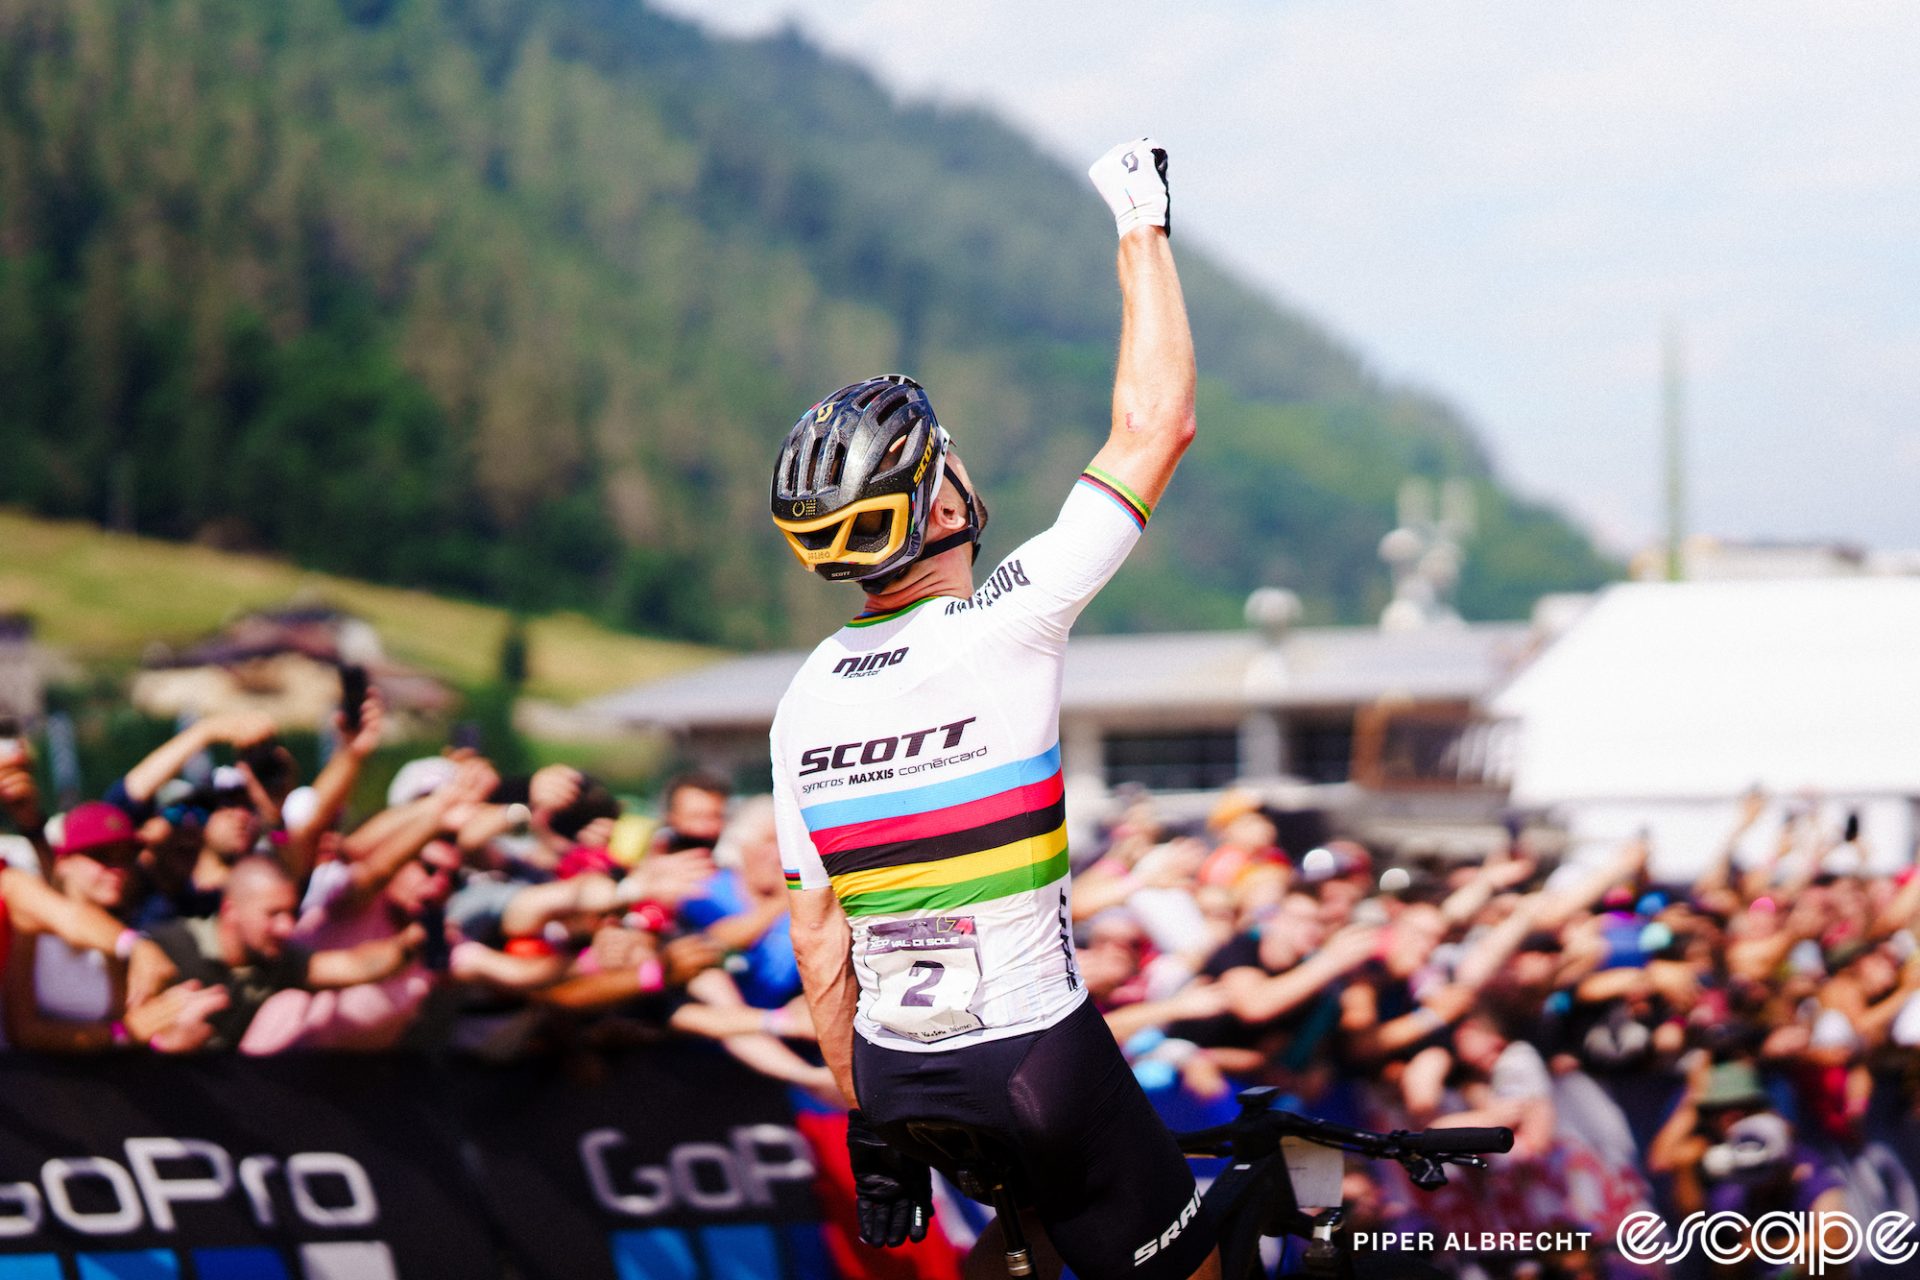 Nino Schurter crosses the finish line first, finger pointed to the sky, in what is a very familiar scene for mountain bike fans.